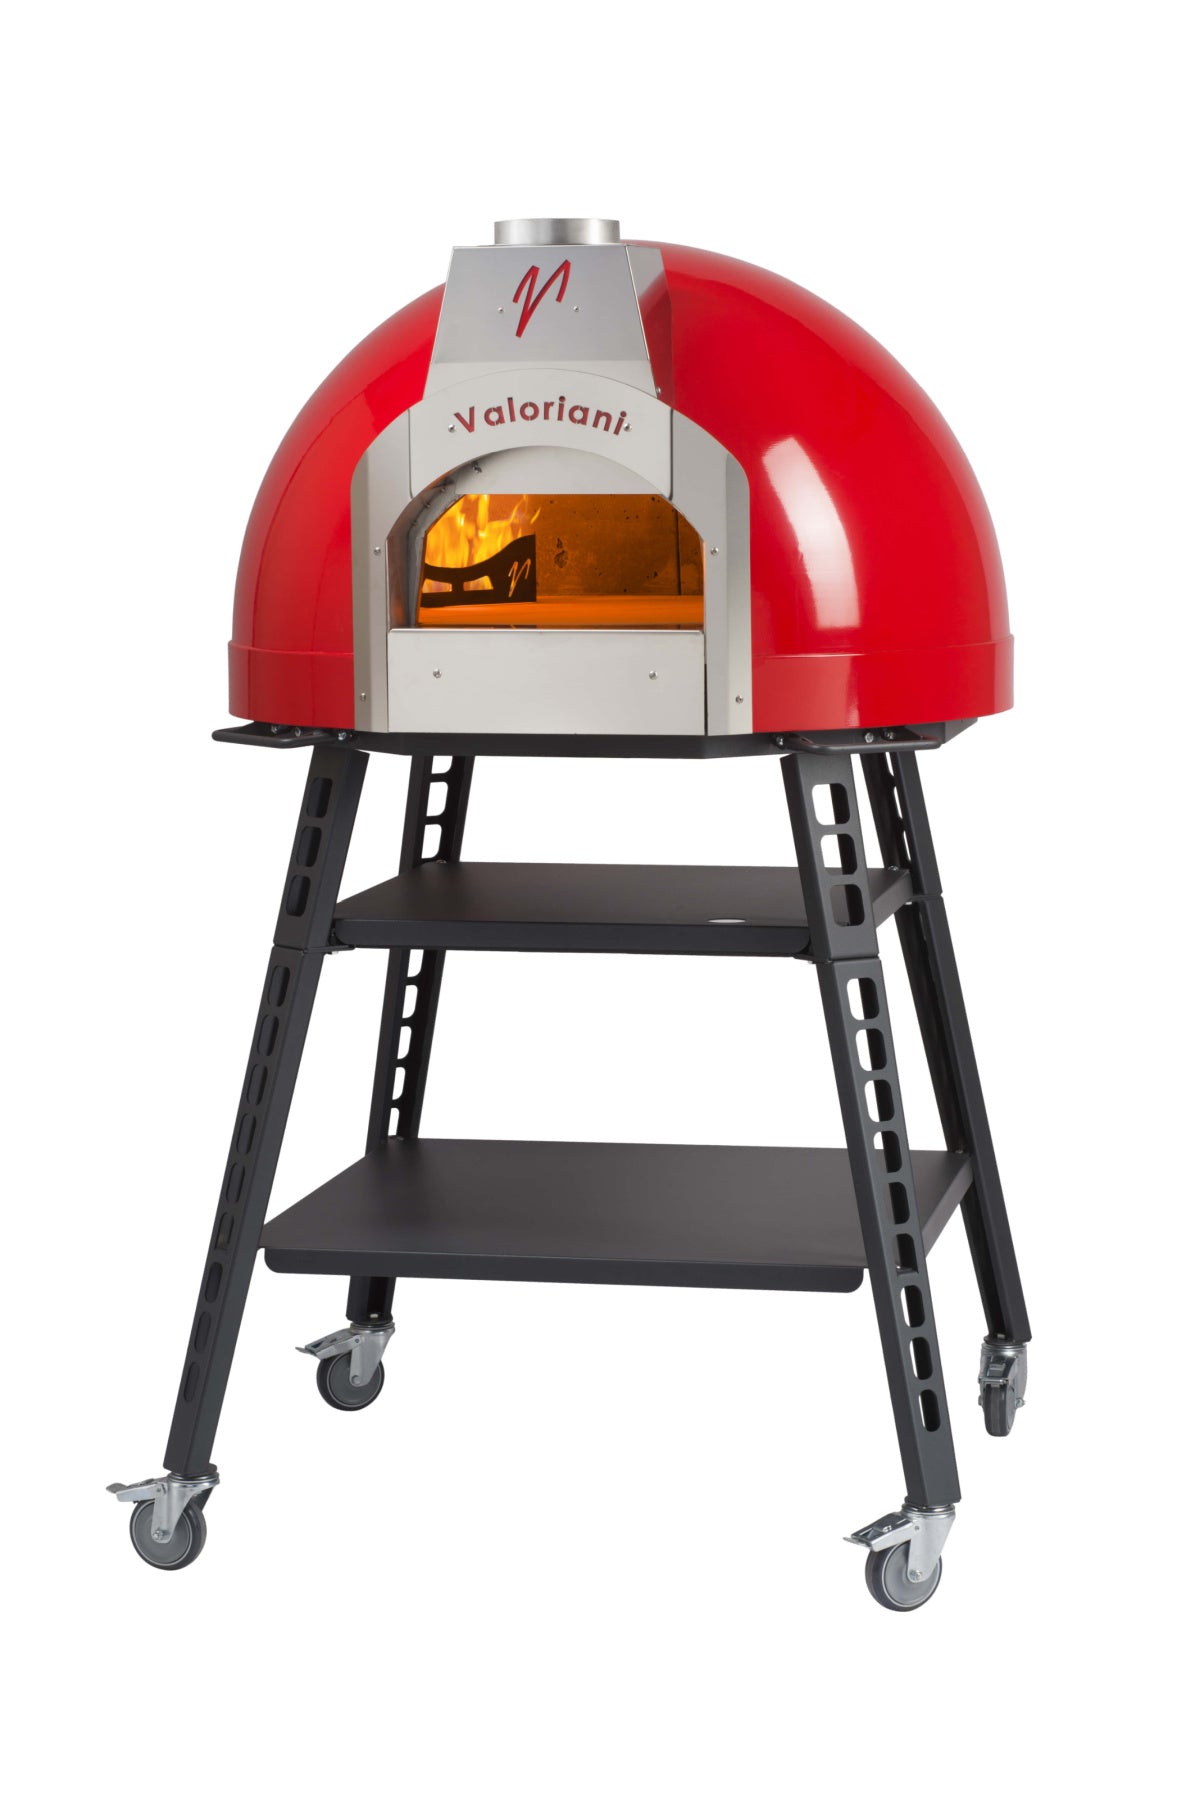 Valoriani Baby 75 Wood Fired Pizza Oven